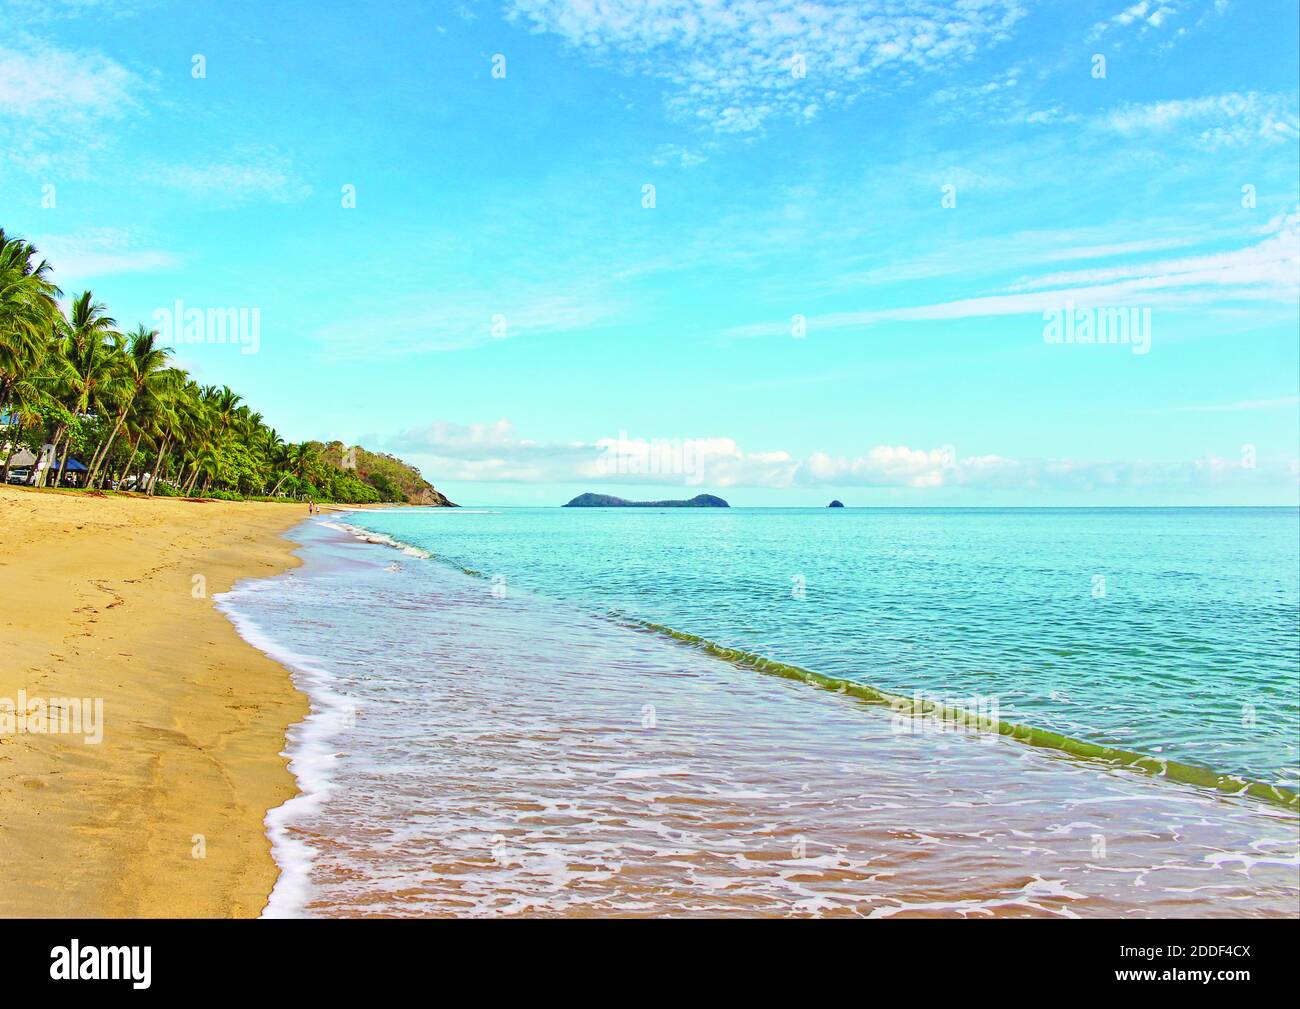 The tropical beachscape of blue sky, palm trees, lapping sea water as seen from Trinity Beach looking north towards Palm Cove and the islands offshore Stock Photo